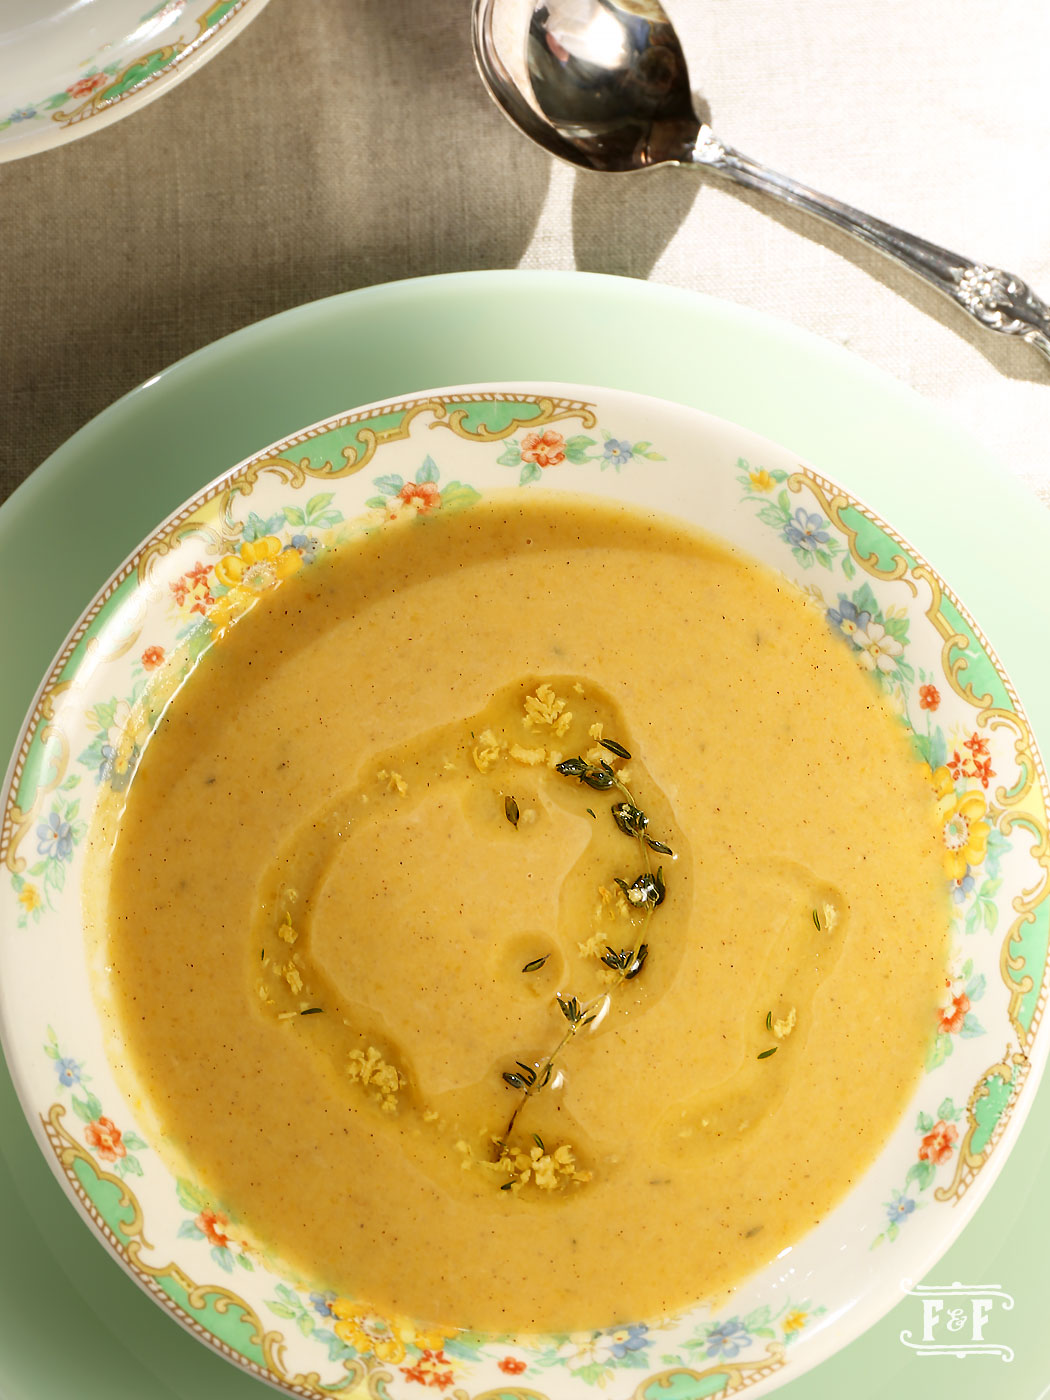  Butternut Squash Green Apple Soup Drizzled with Thyme and Garlic Oil